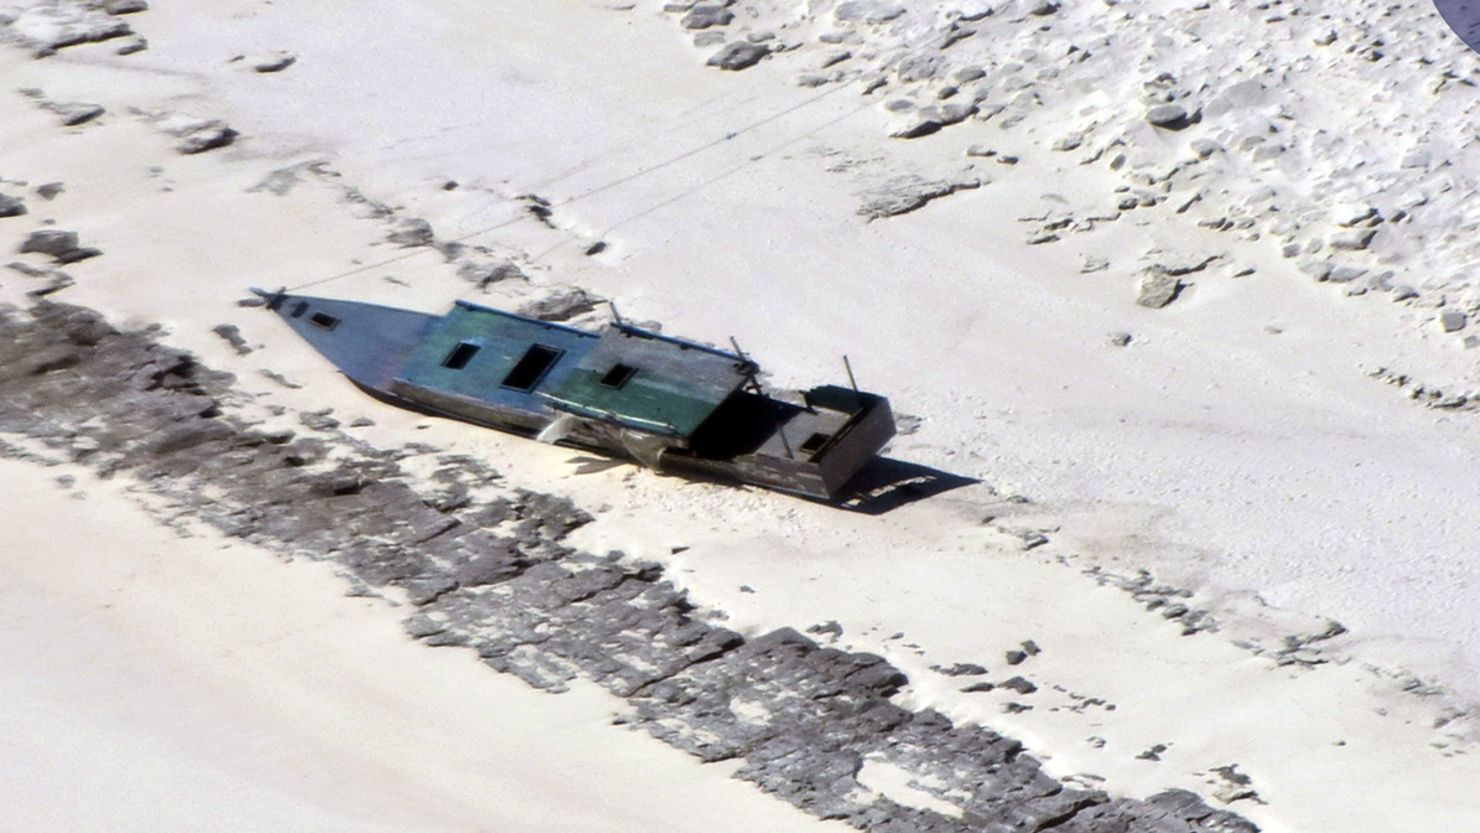 The fishers were stranded on remote Bedwell Island, a stretch of sand in the Rowley Shoals, about 300 kilometers west of Broome on the northwestern Australian coast. 